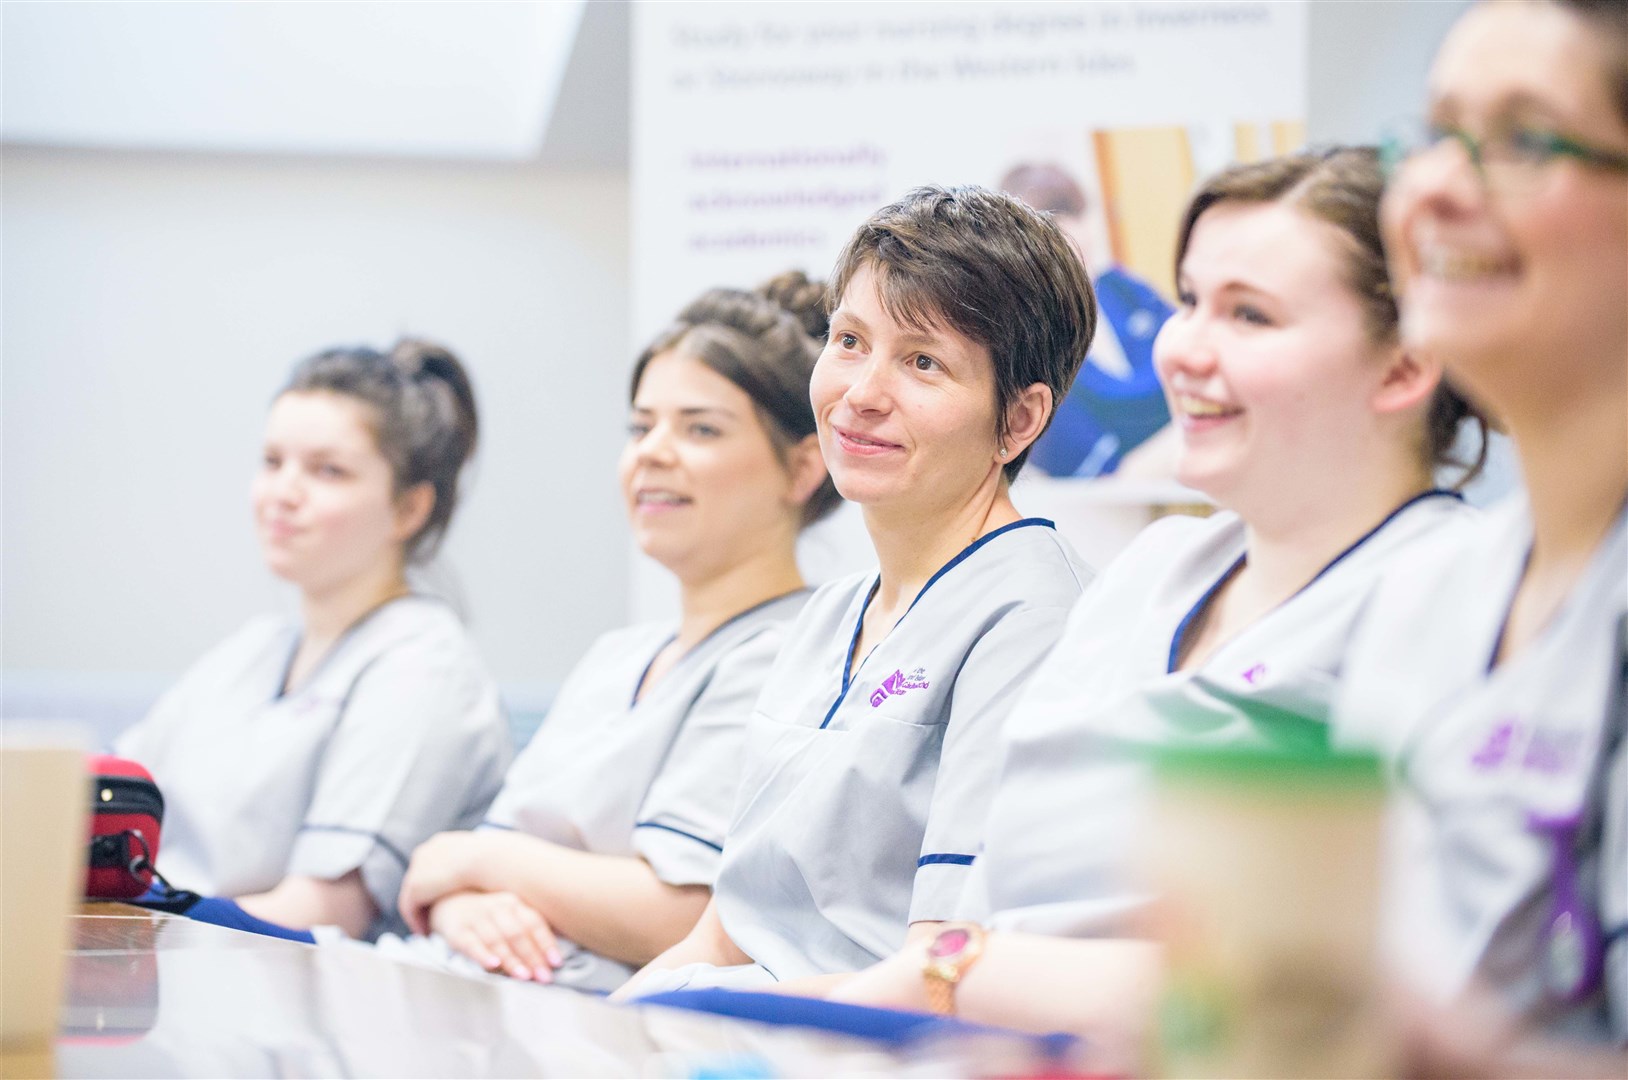 Nursing students during a course lesson at the UHI.